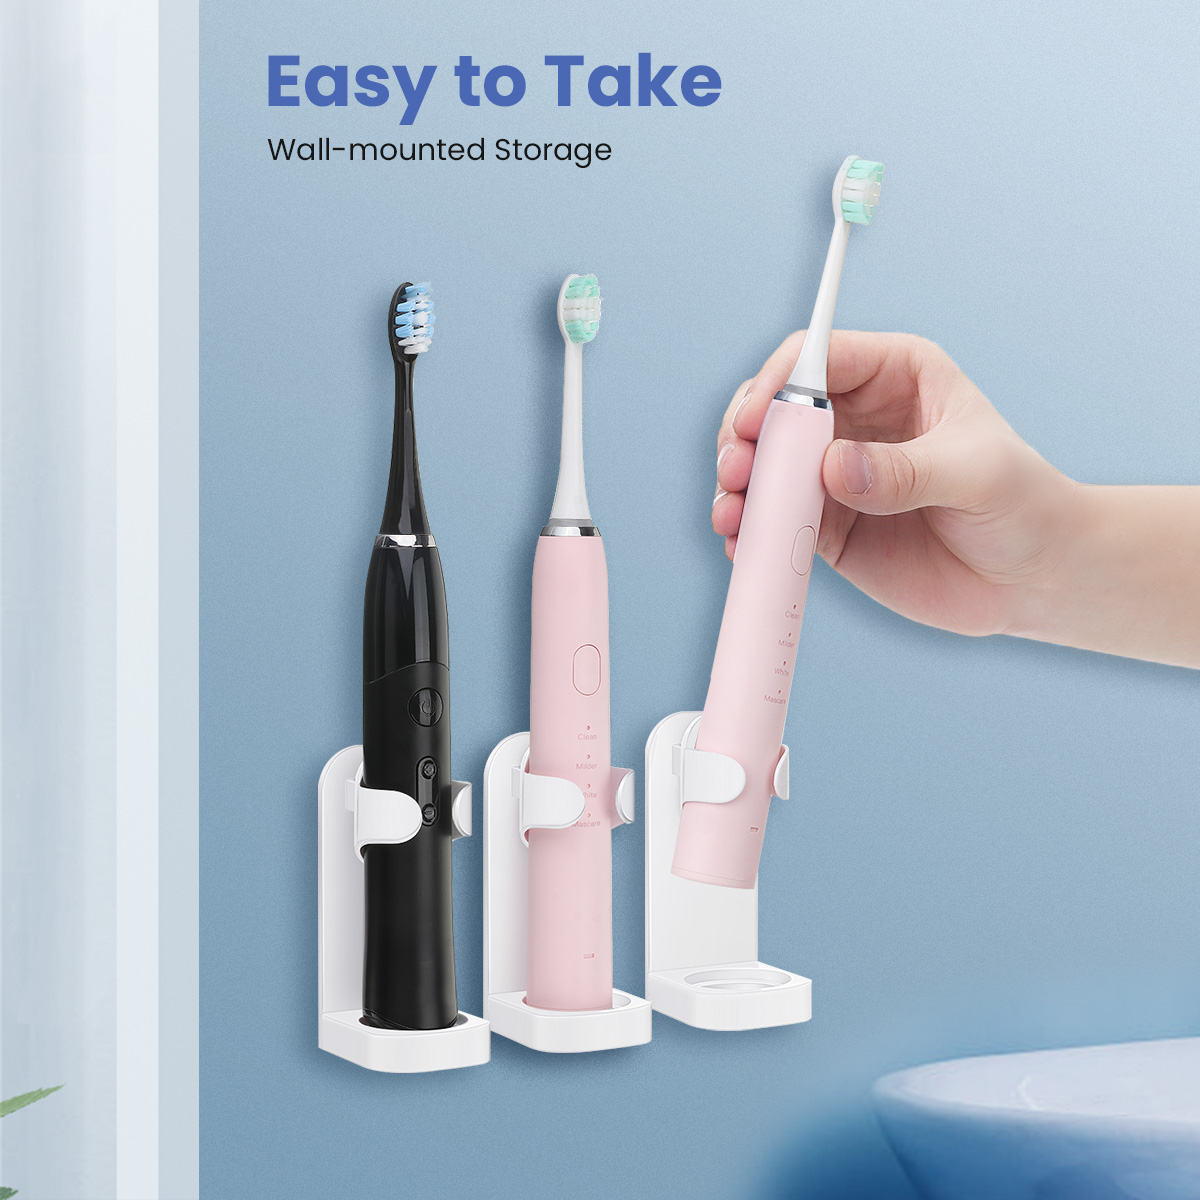 MECO-ELEVERDE-2Pcs-Creative-Traceless-Stand-Rack-Toothbrush-Organizer-Electric-Toothbrush-Wall-Mount-1810364-4